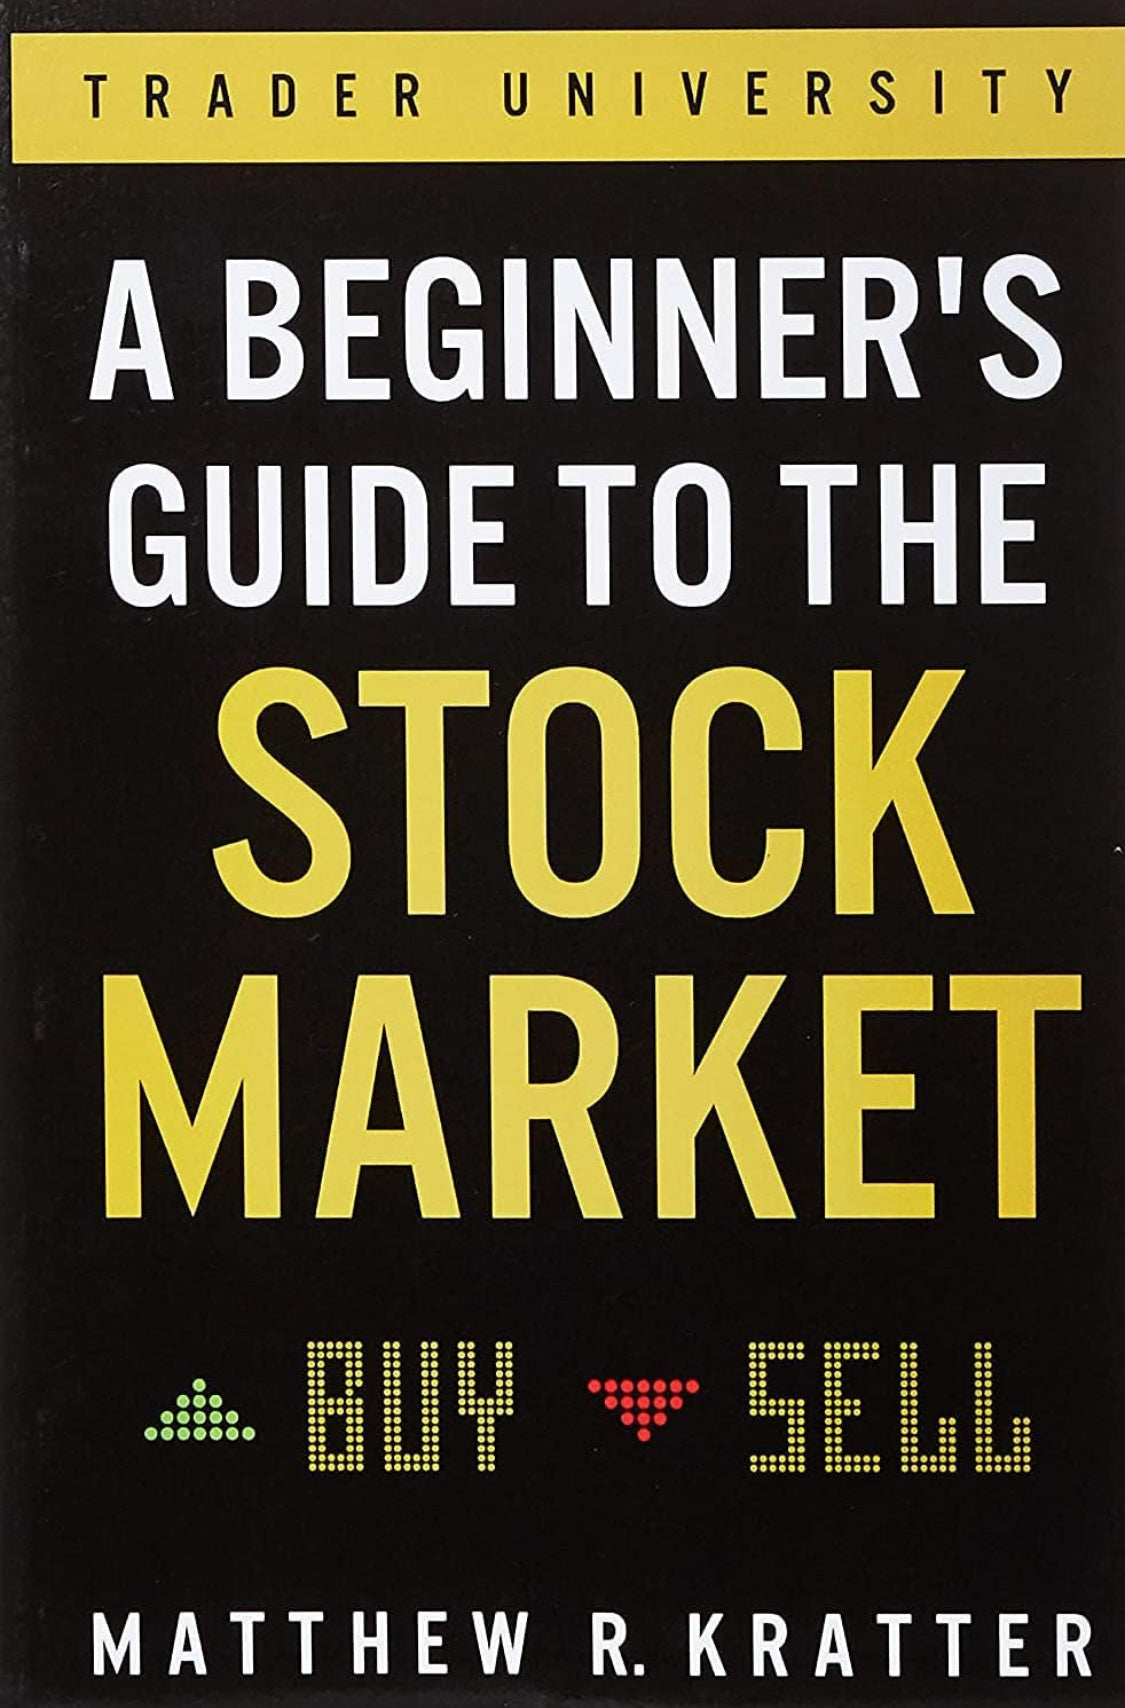 A Beginner's Guide To The Stock Market